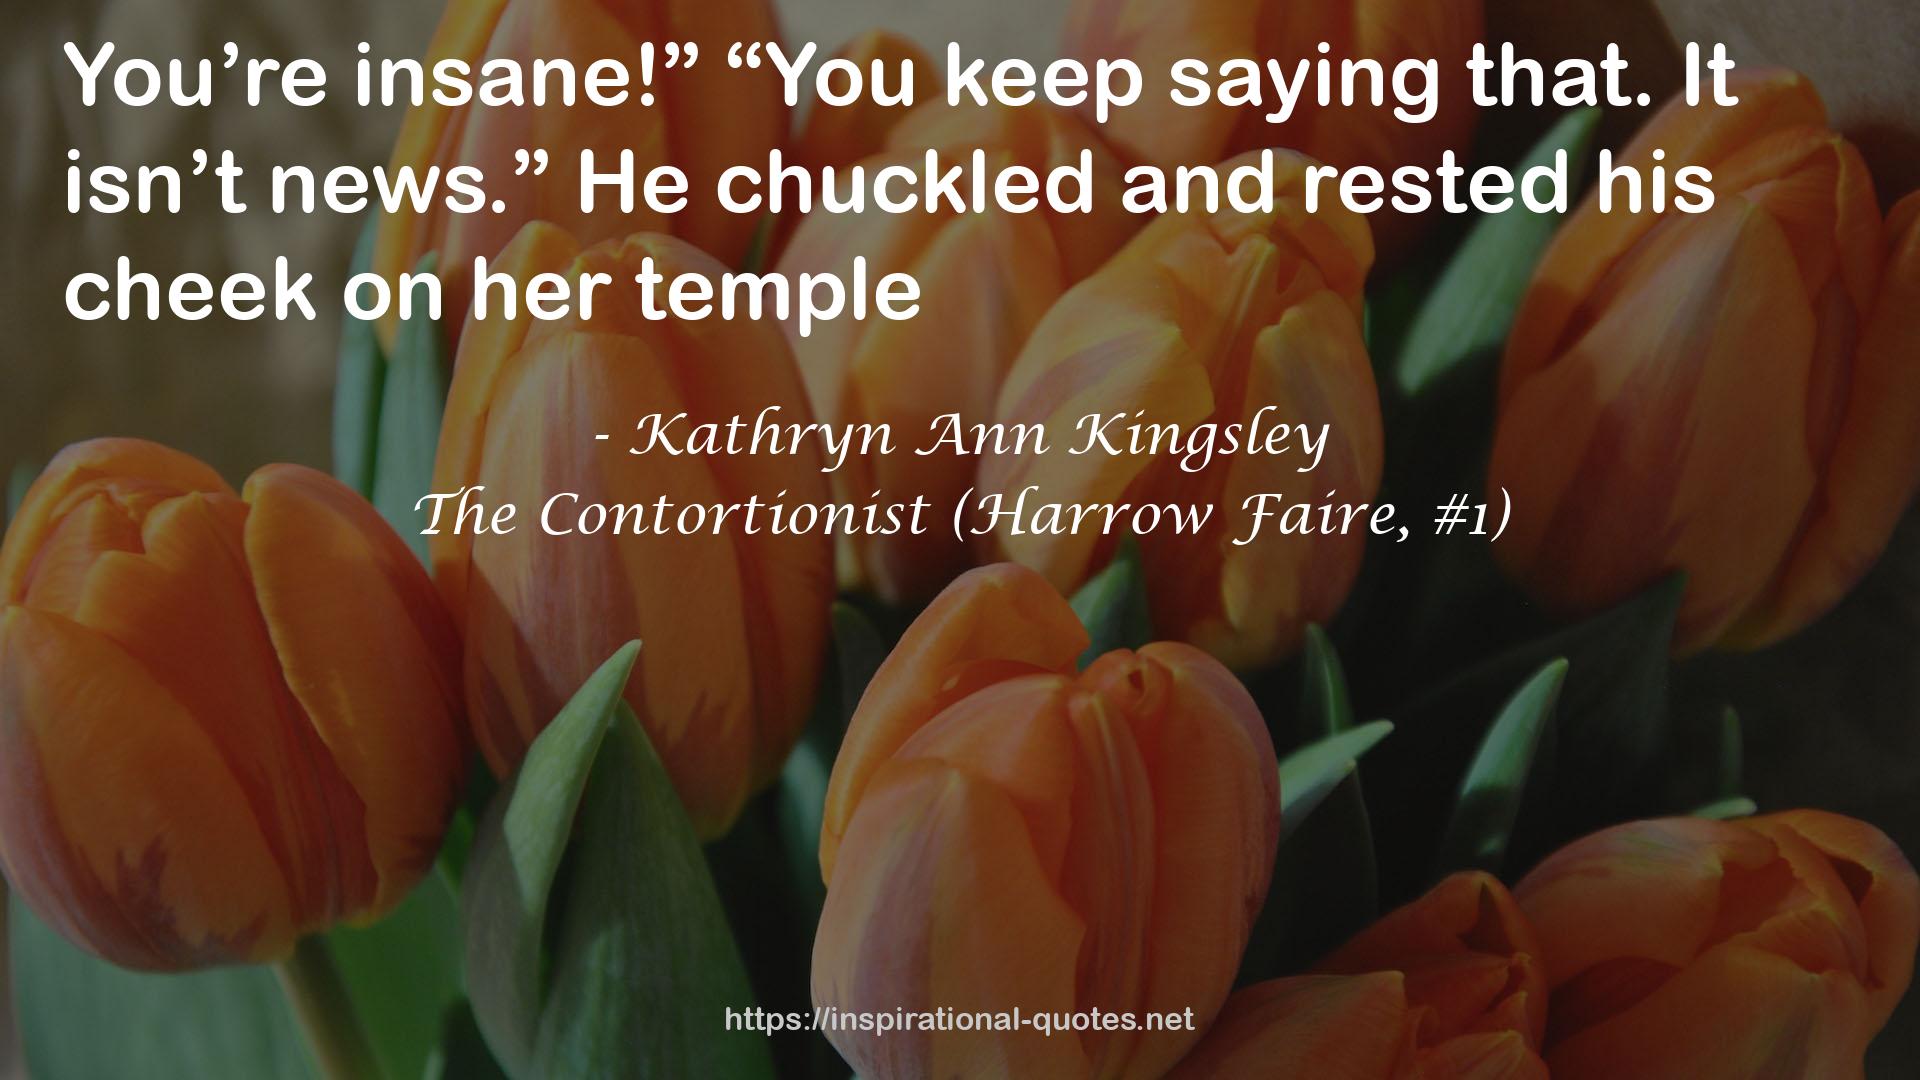 The Contortionist (Harrow Faire, #1) QUOTES